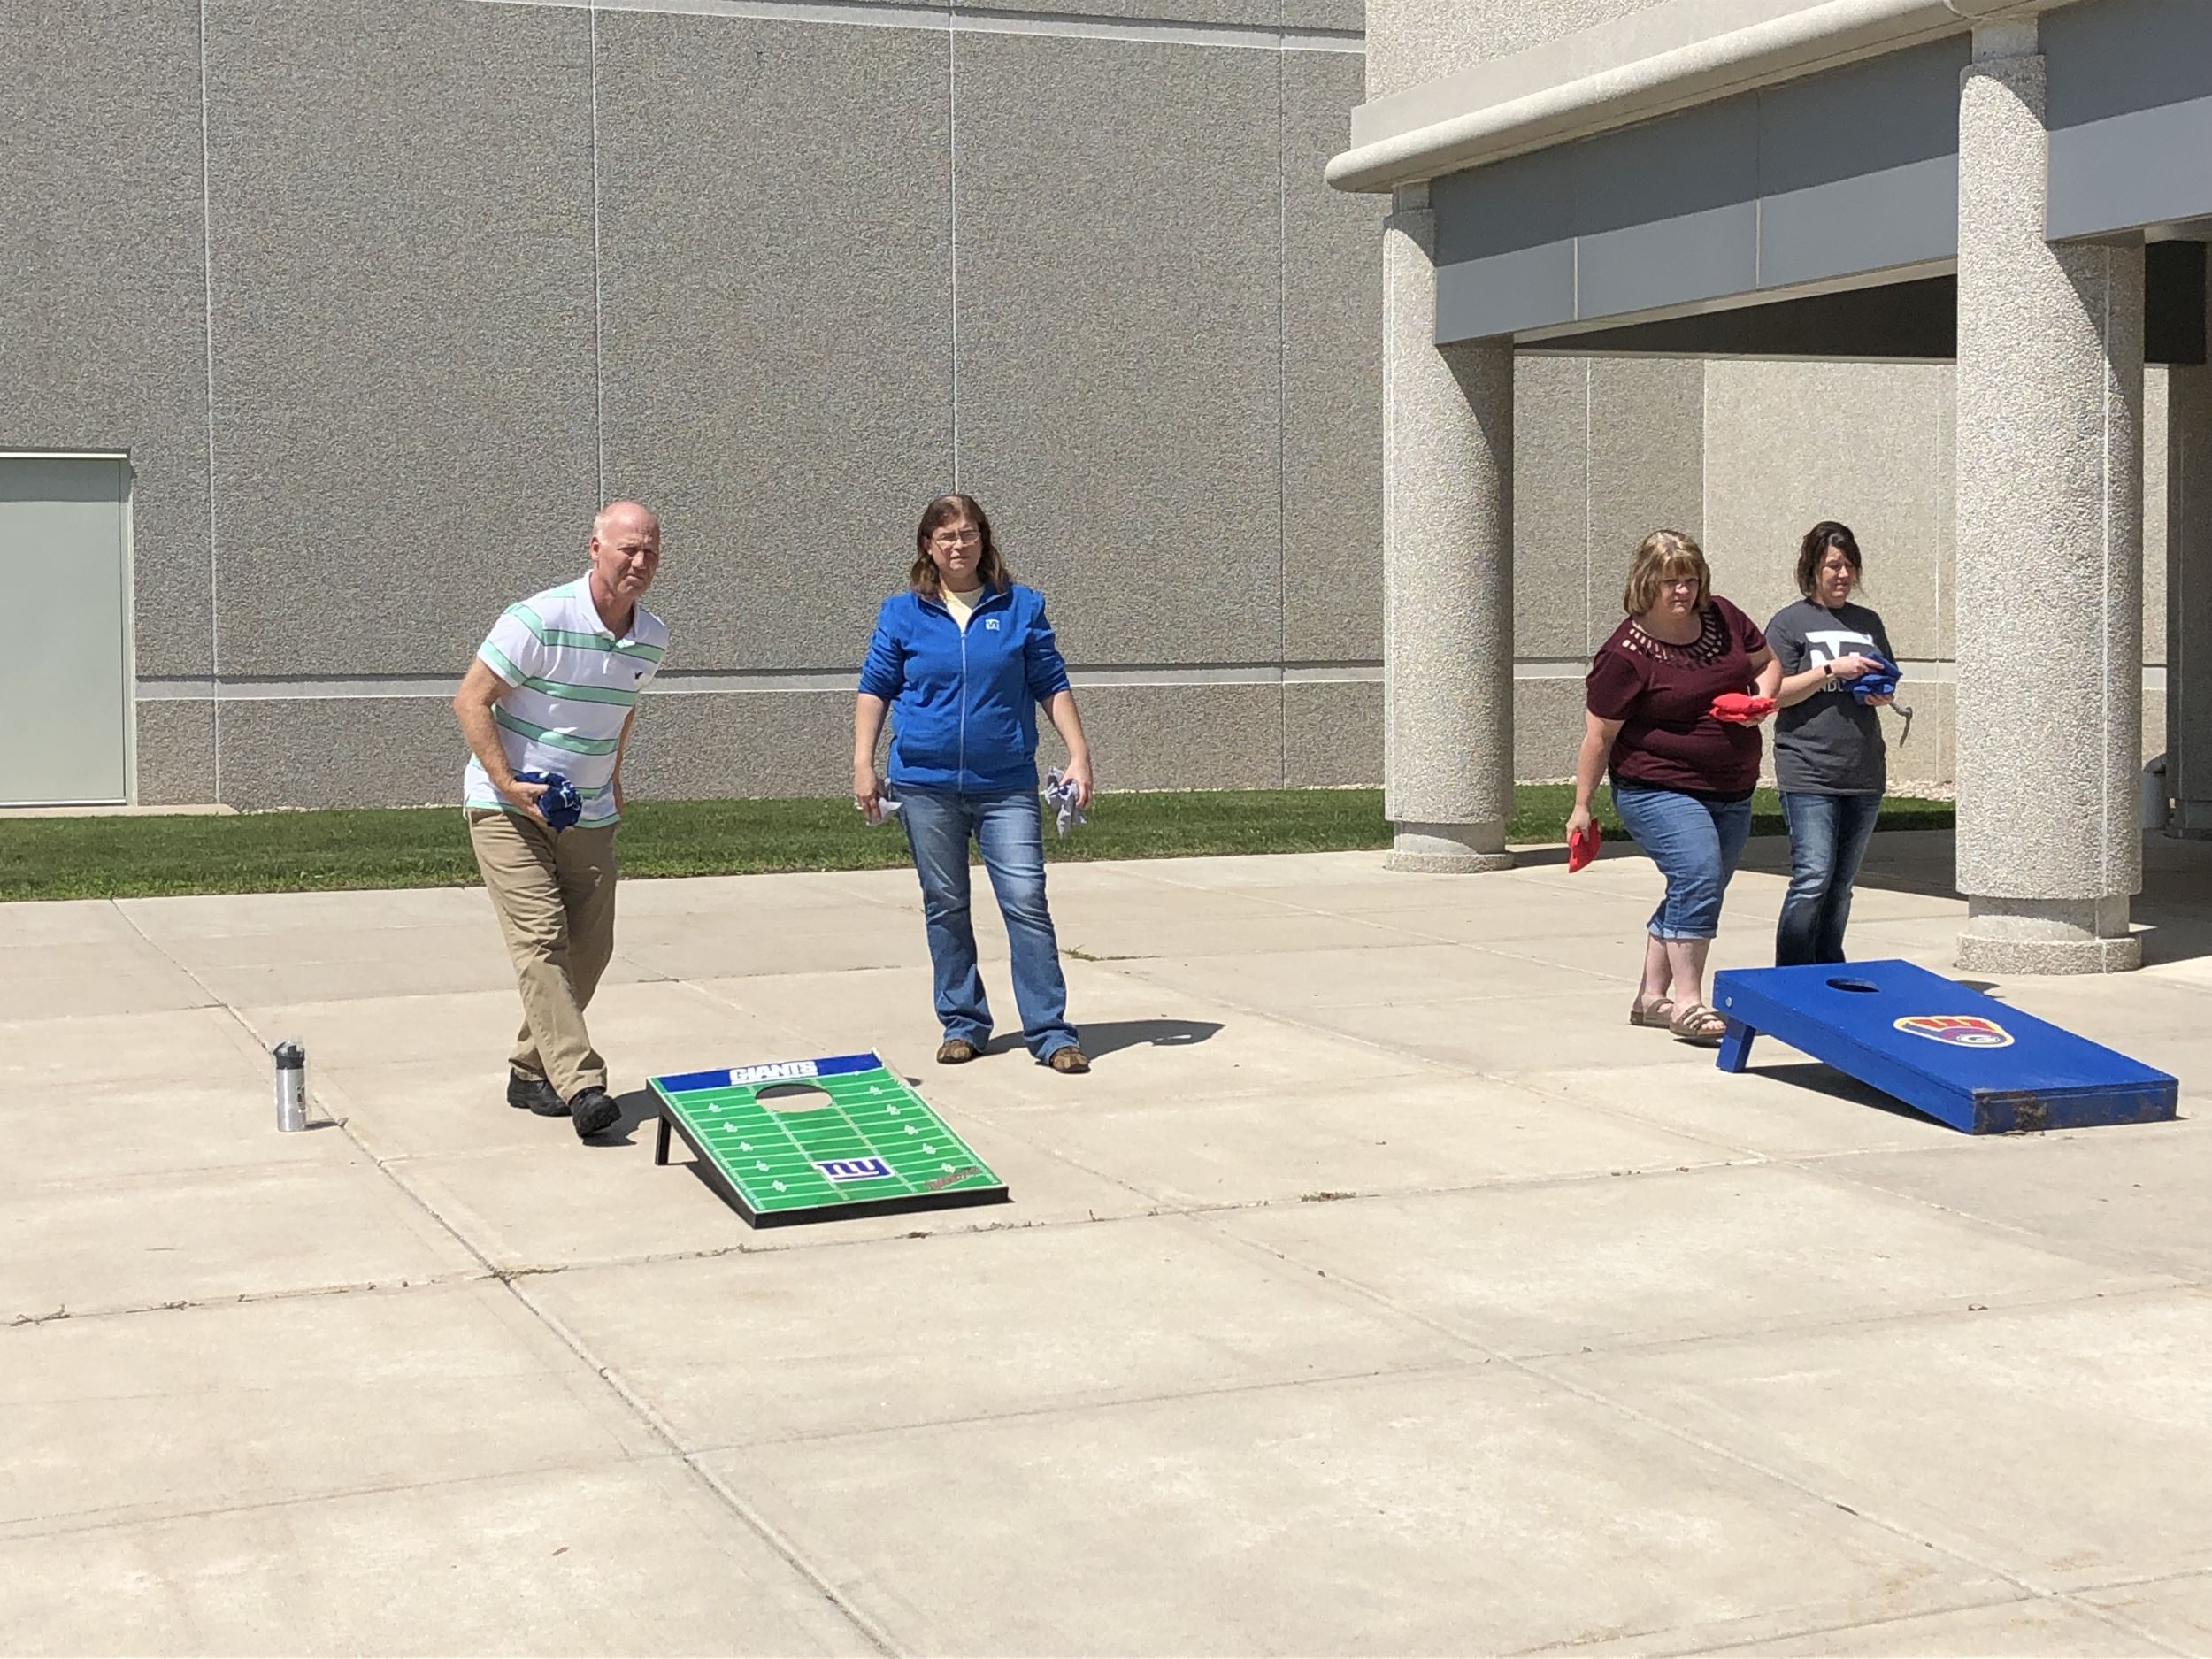 Employees playing a friendly game of bags